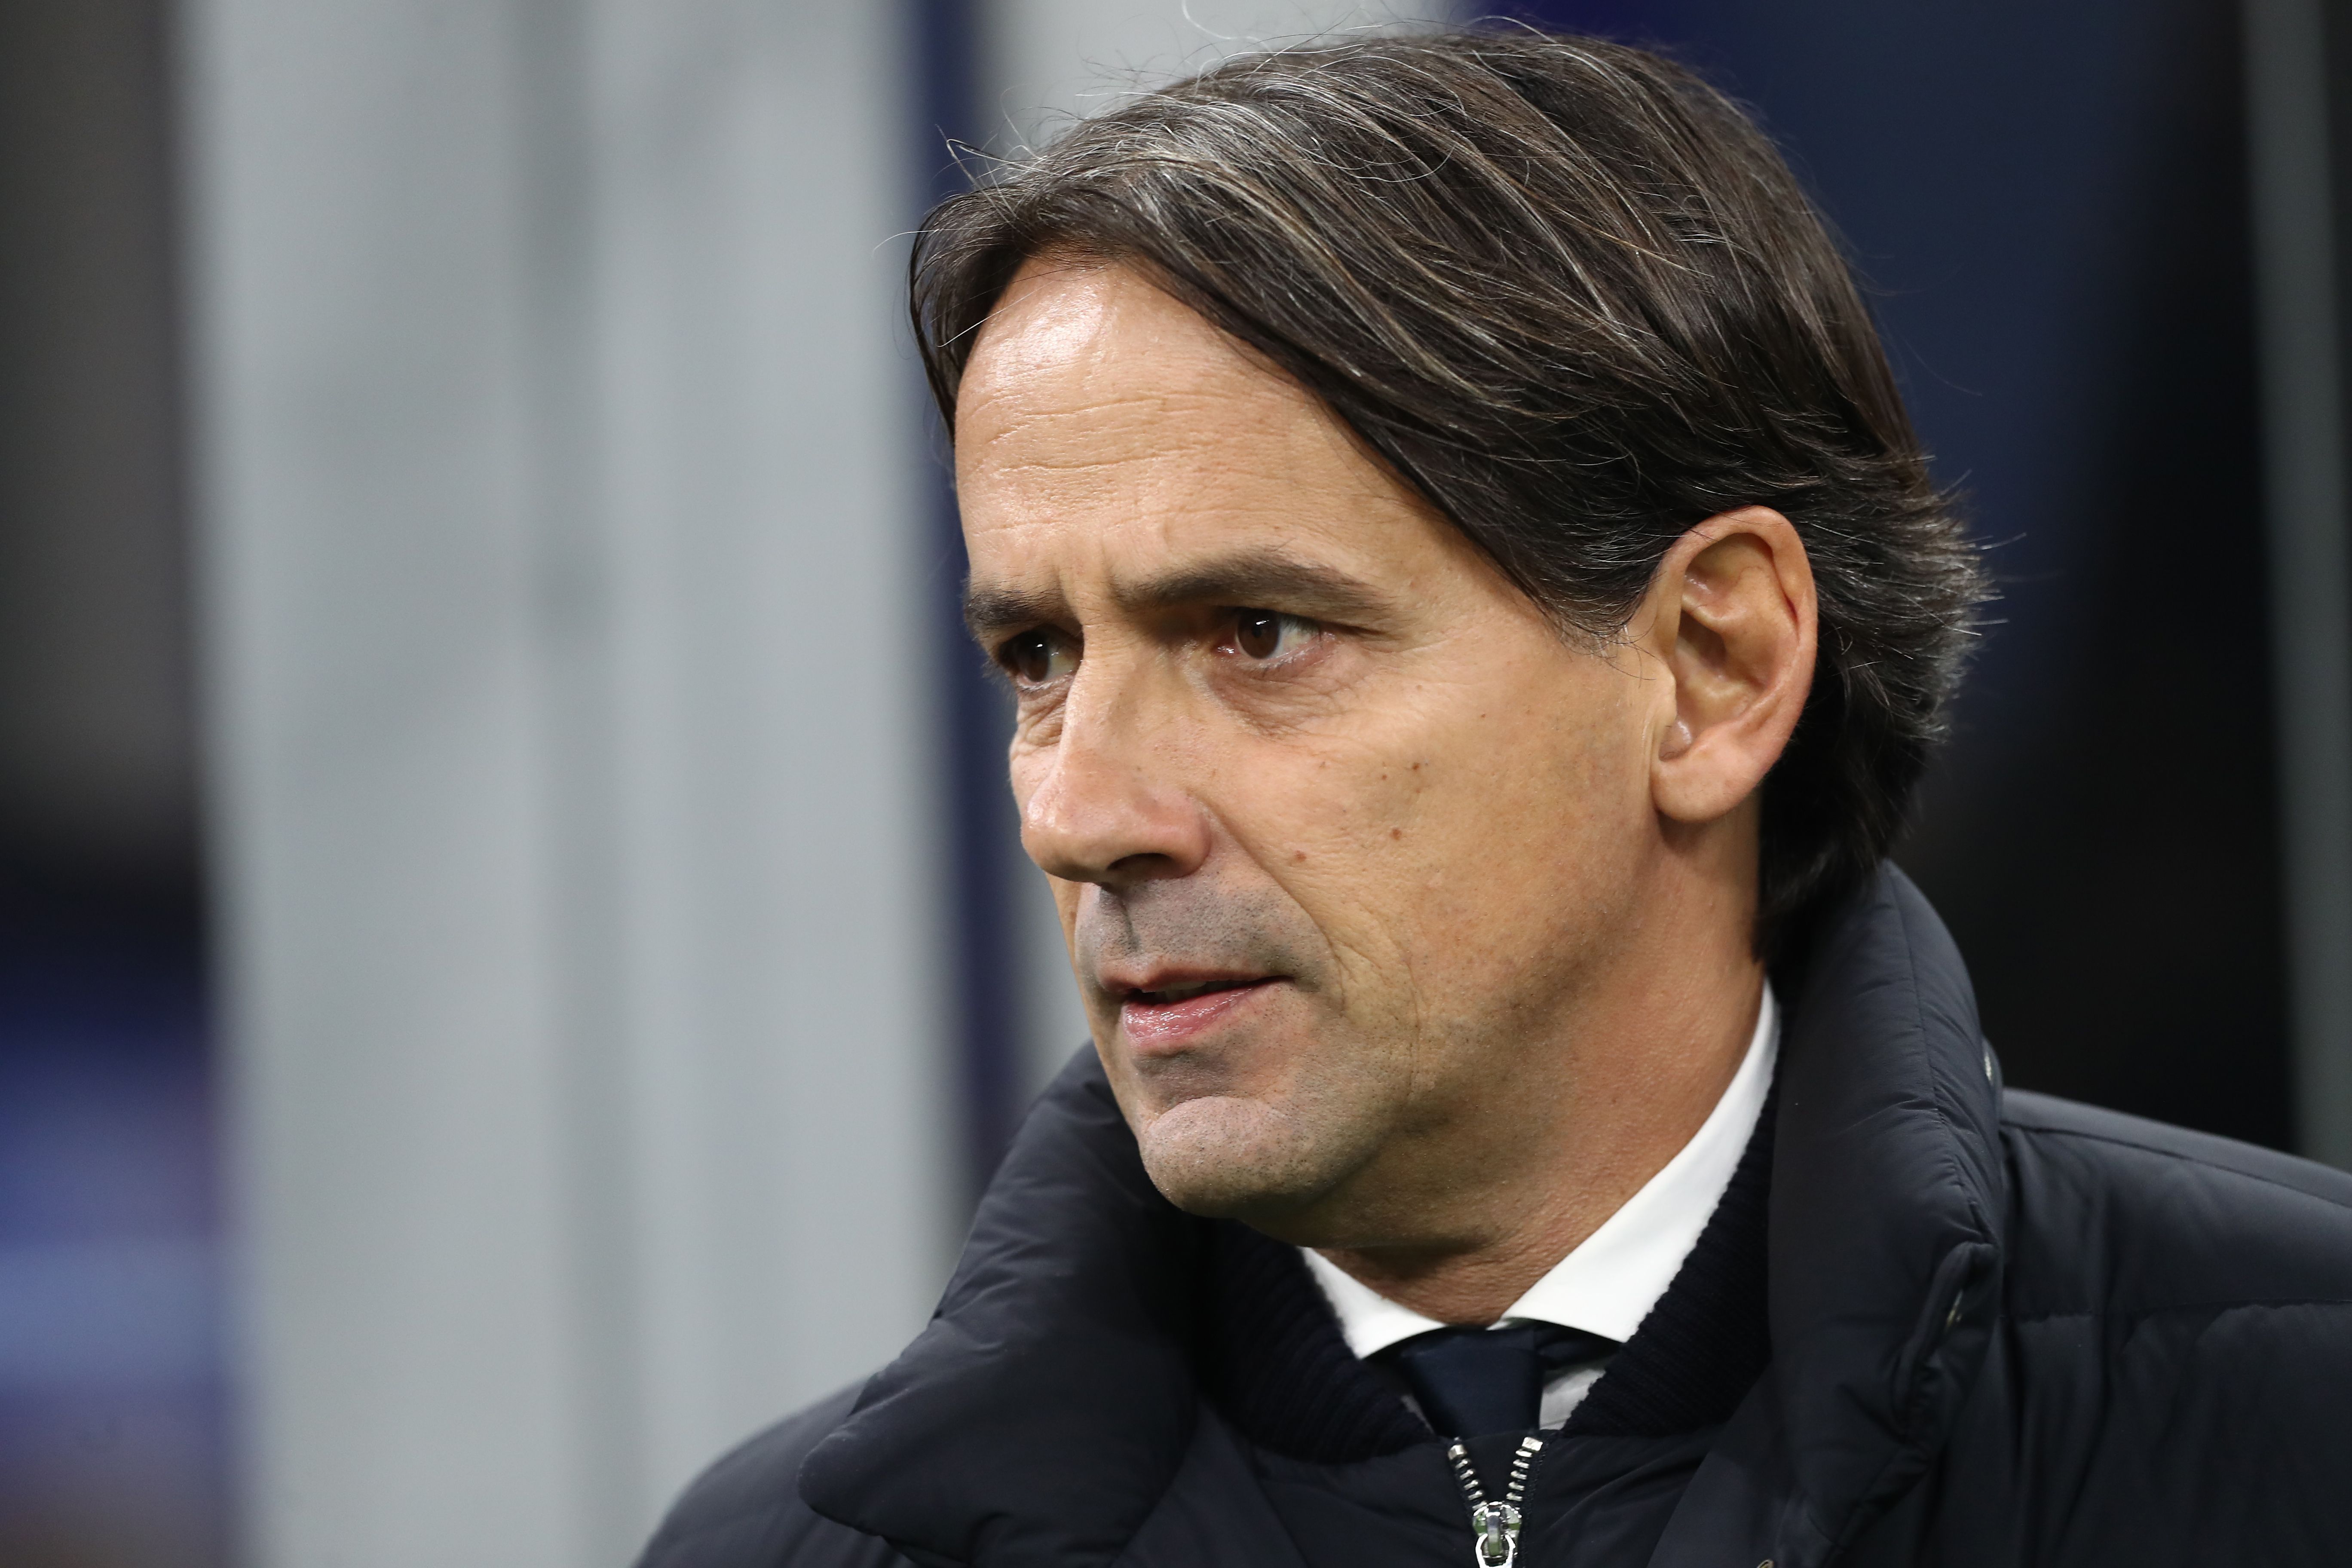 Inzaghi 